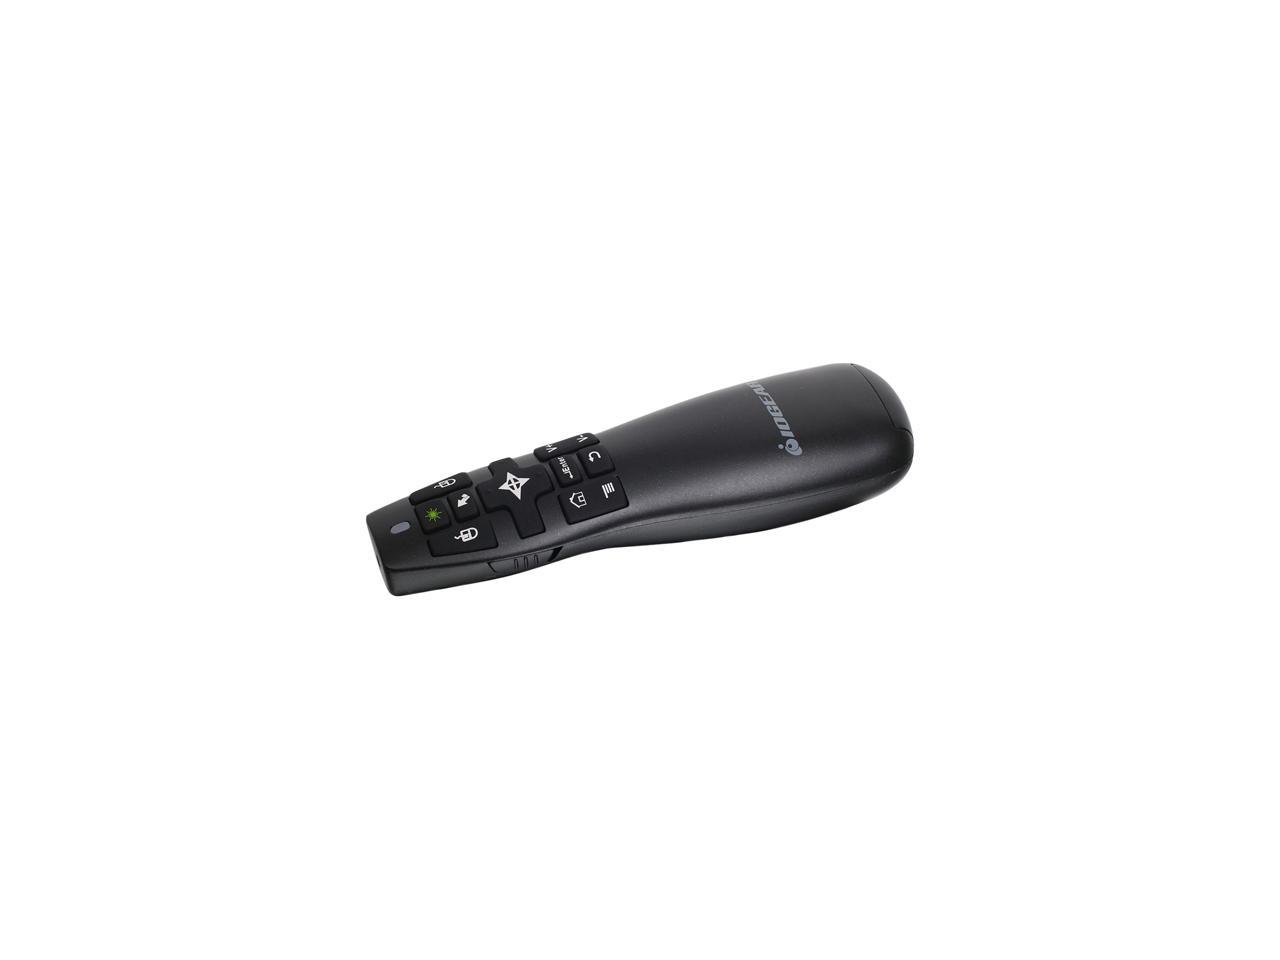 IOGEAR GME435G GreenPoint Pro - 2.4GHz Gyroscopic Presentation Mouse w/ Laser Pointer